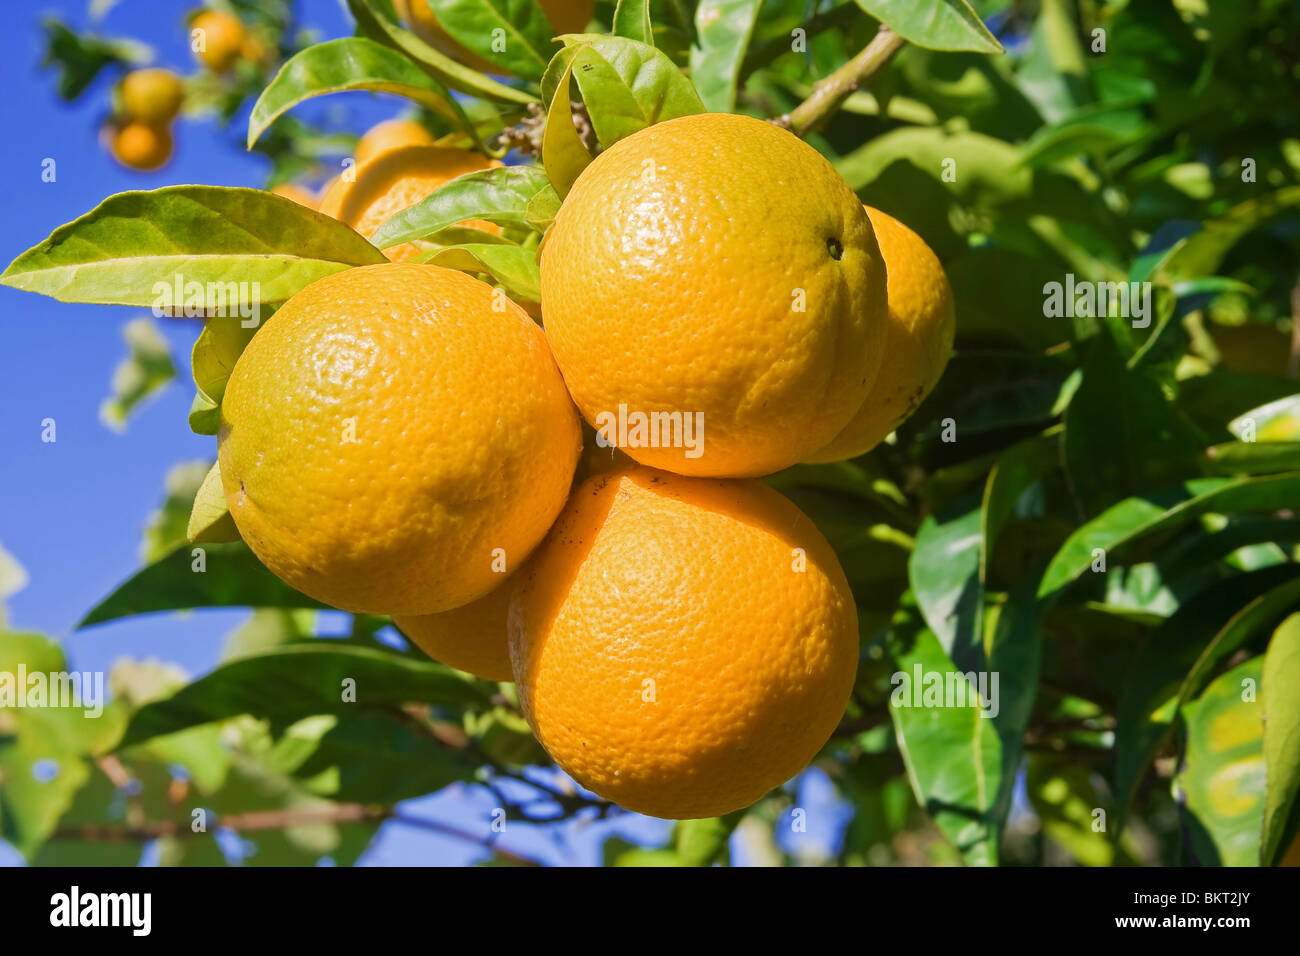 Ripe oranges are hanging on a tree under a bright blue sky Stock Photo